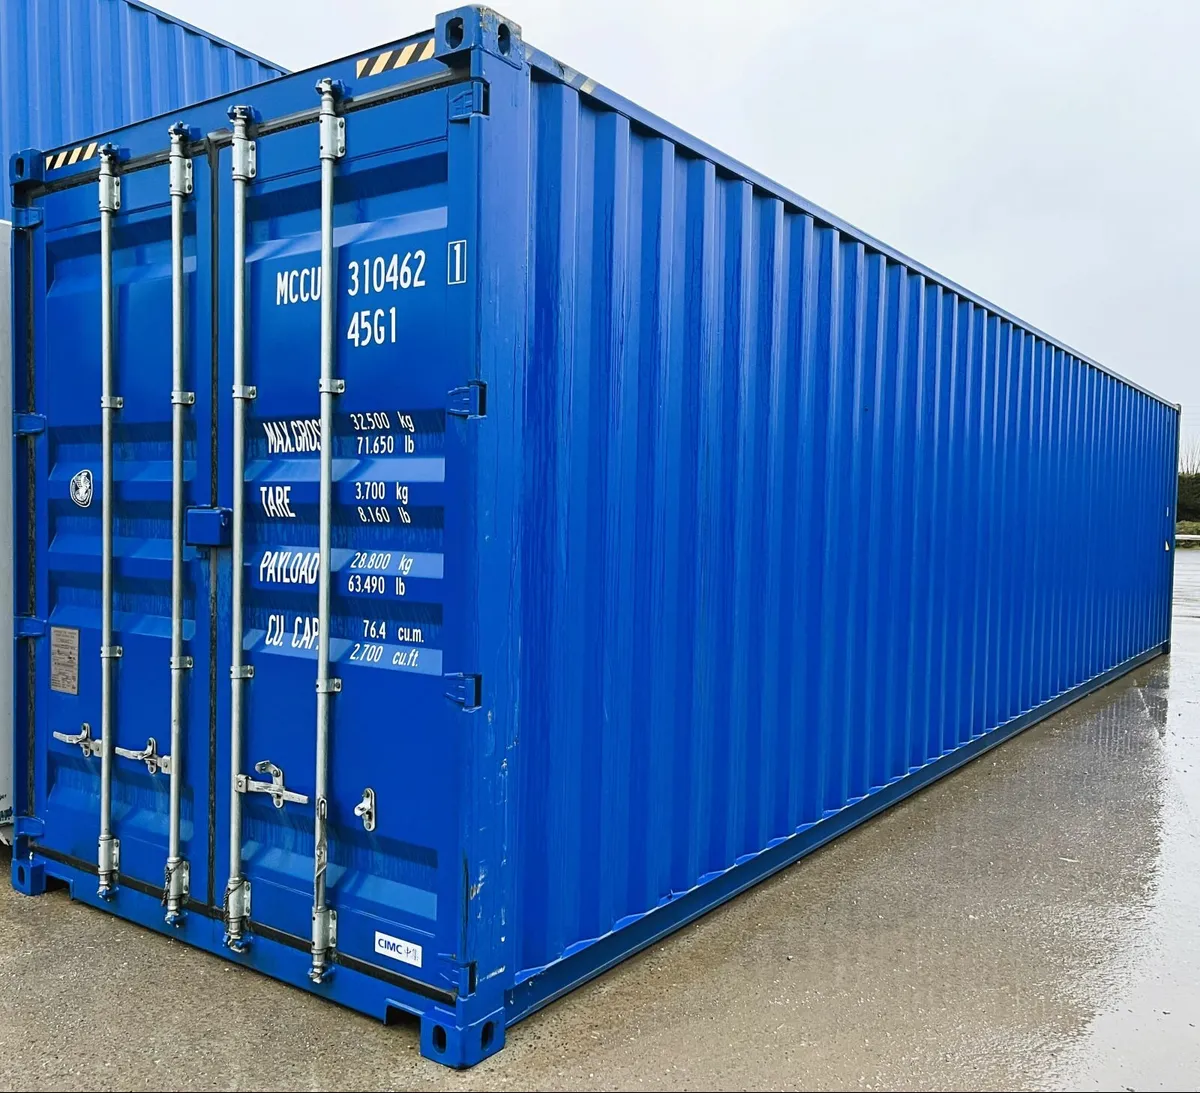 New 40ft Shipping Container - MCCU 310462 / 1 - Image 1